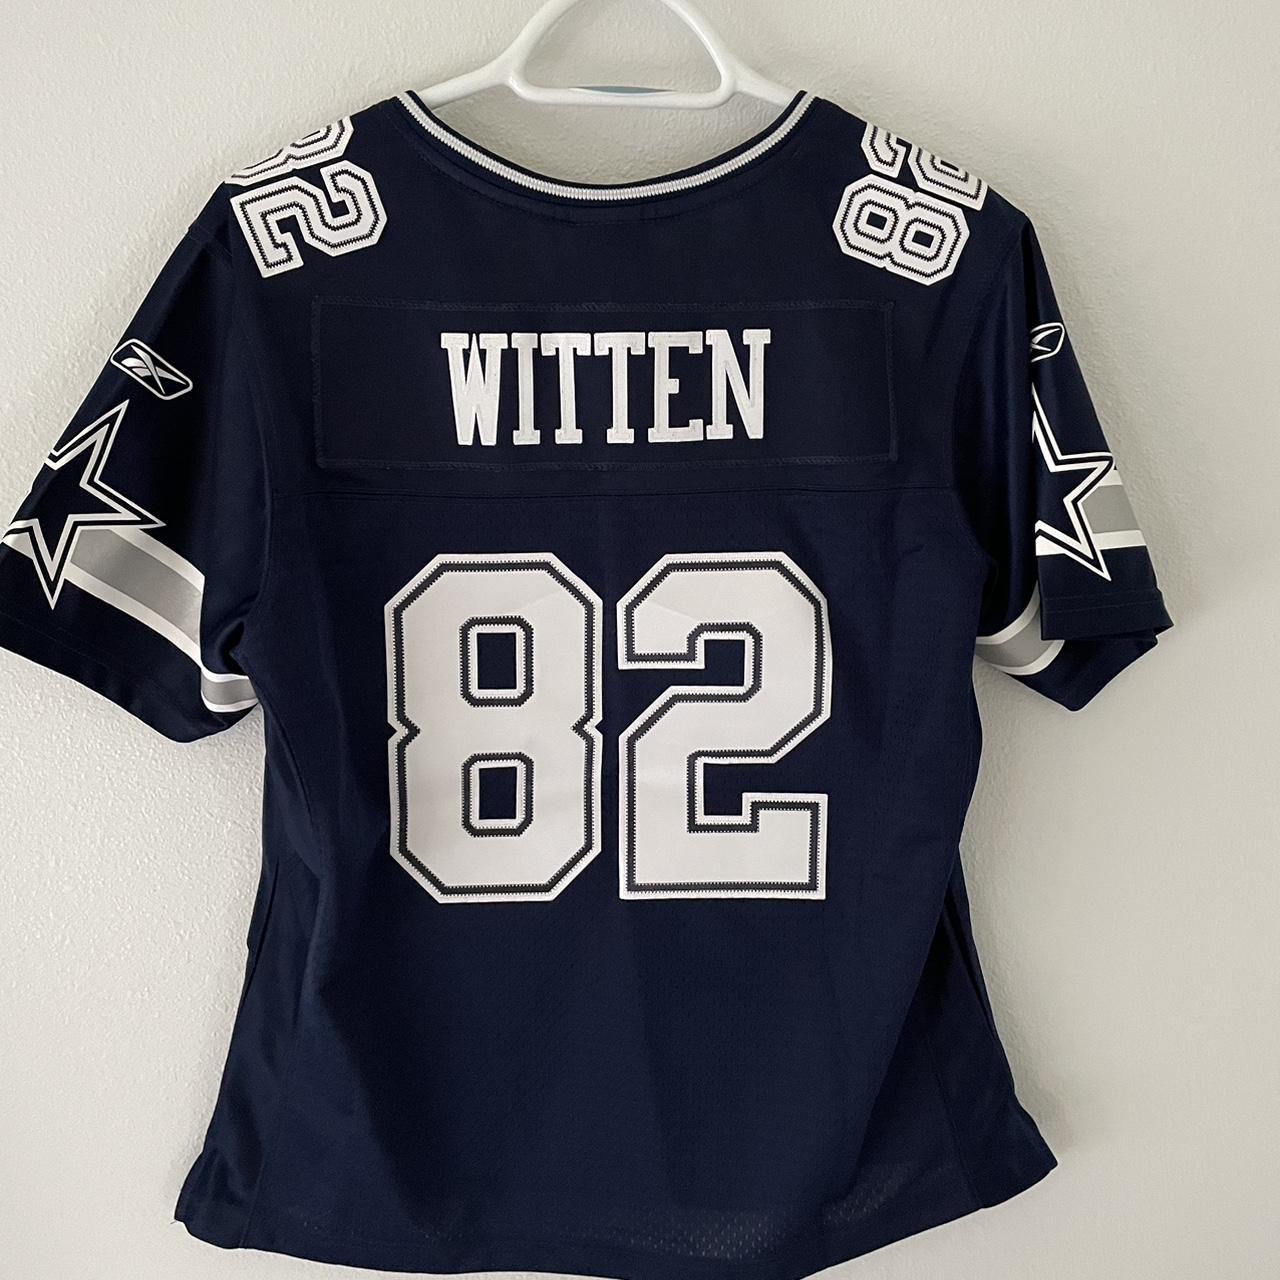 DALLAS COWBOYS JERSEY LIMITED EDITION ADD THIS - Depop